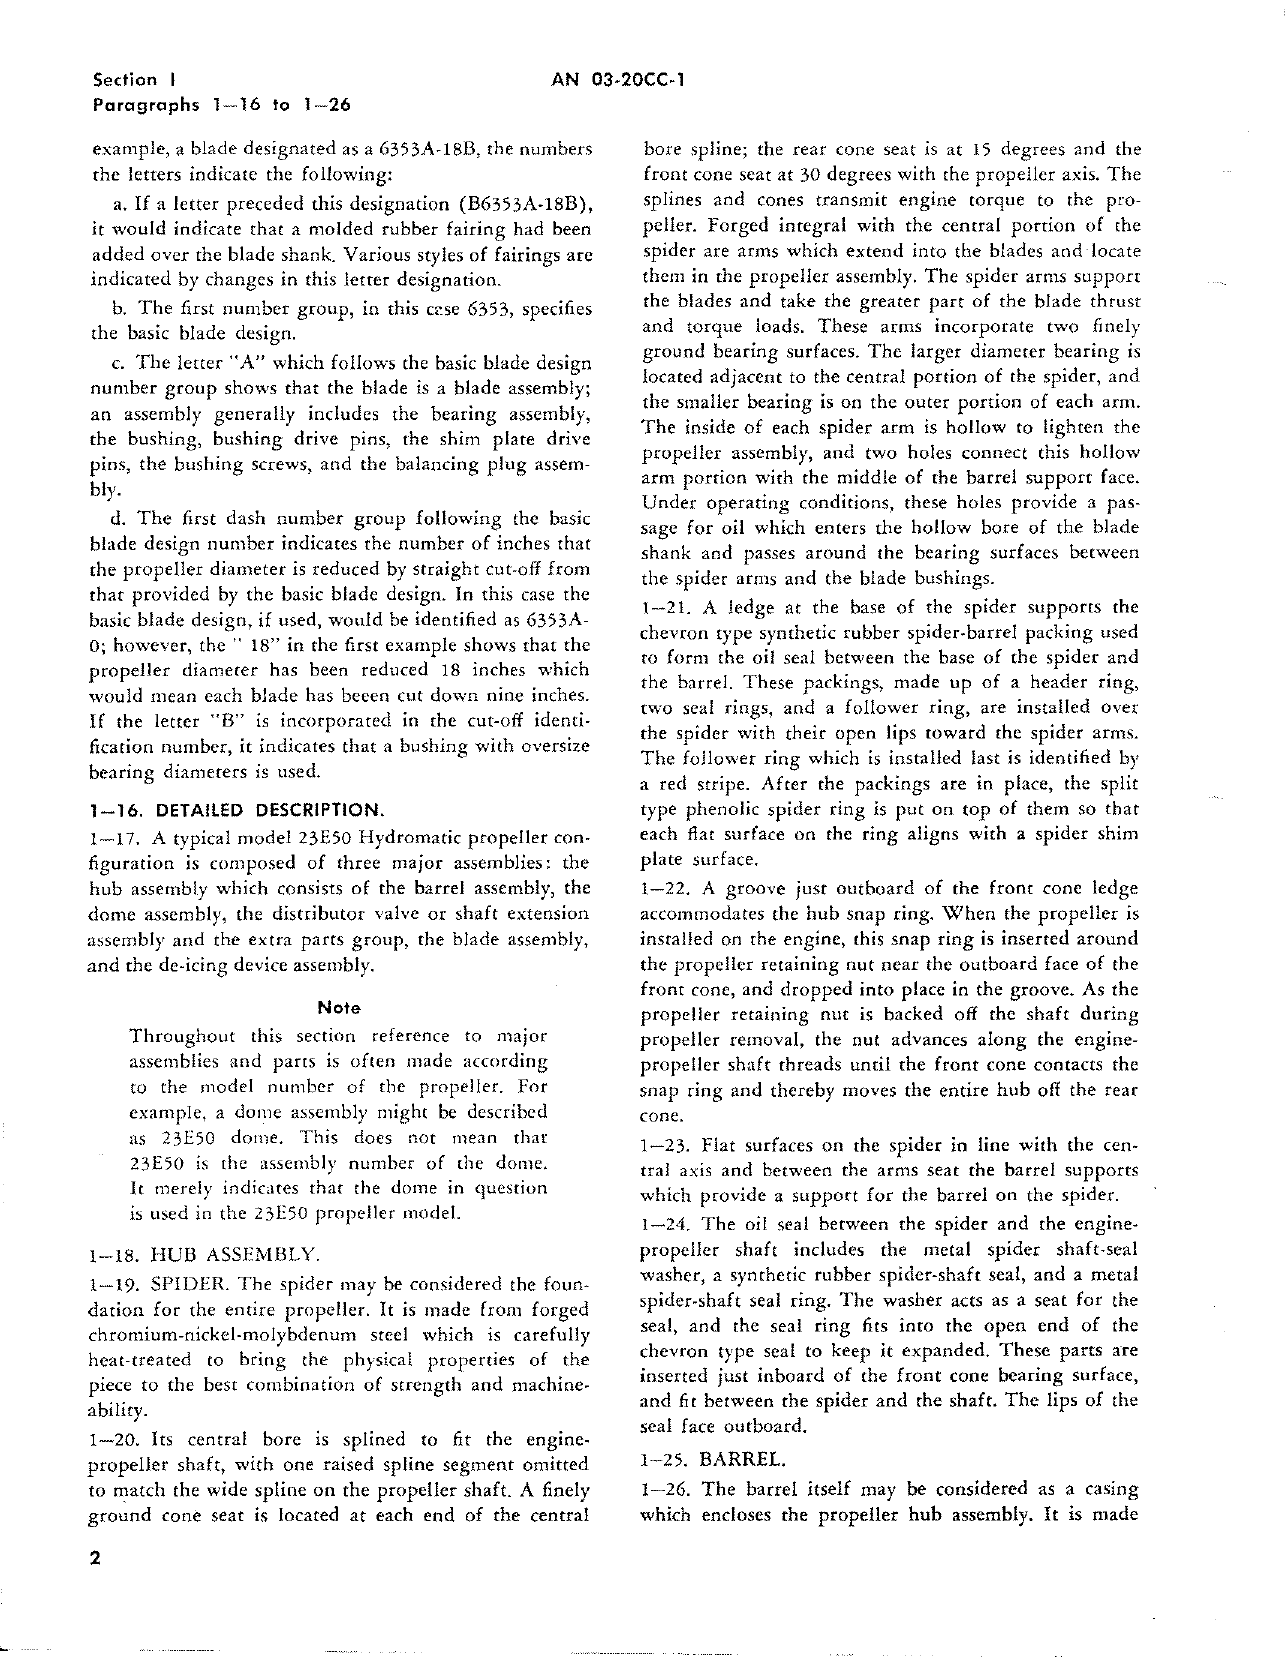 Sample page 6 from AirCorps Library document: Overhaul Instructions for Hydromatic Propellers